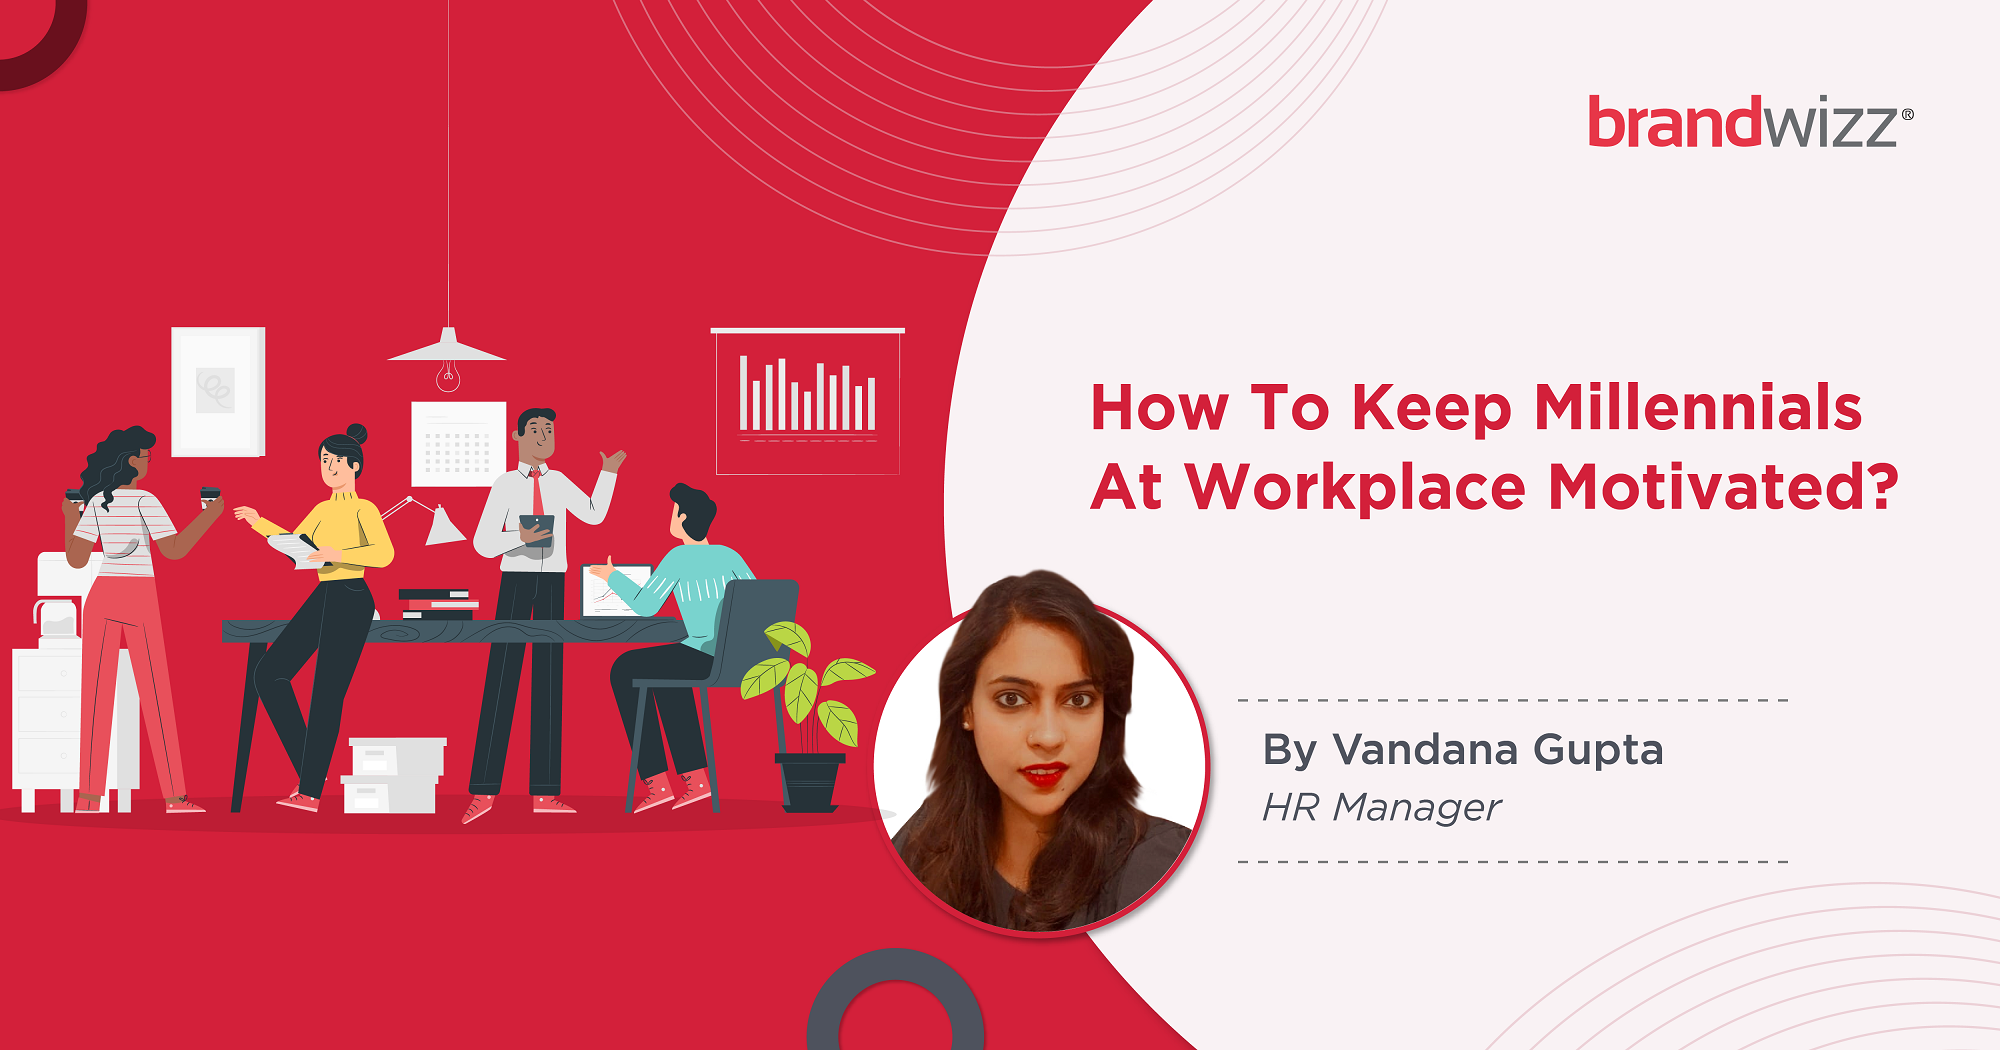 How To Keep Millennials At Workplace Motivated?